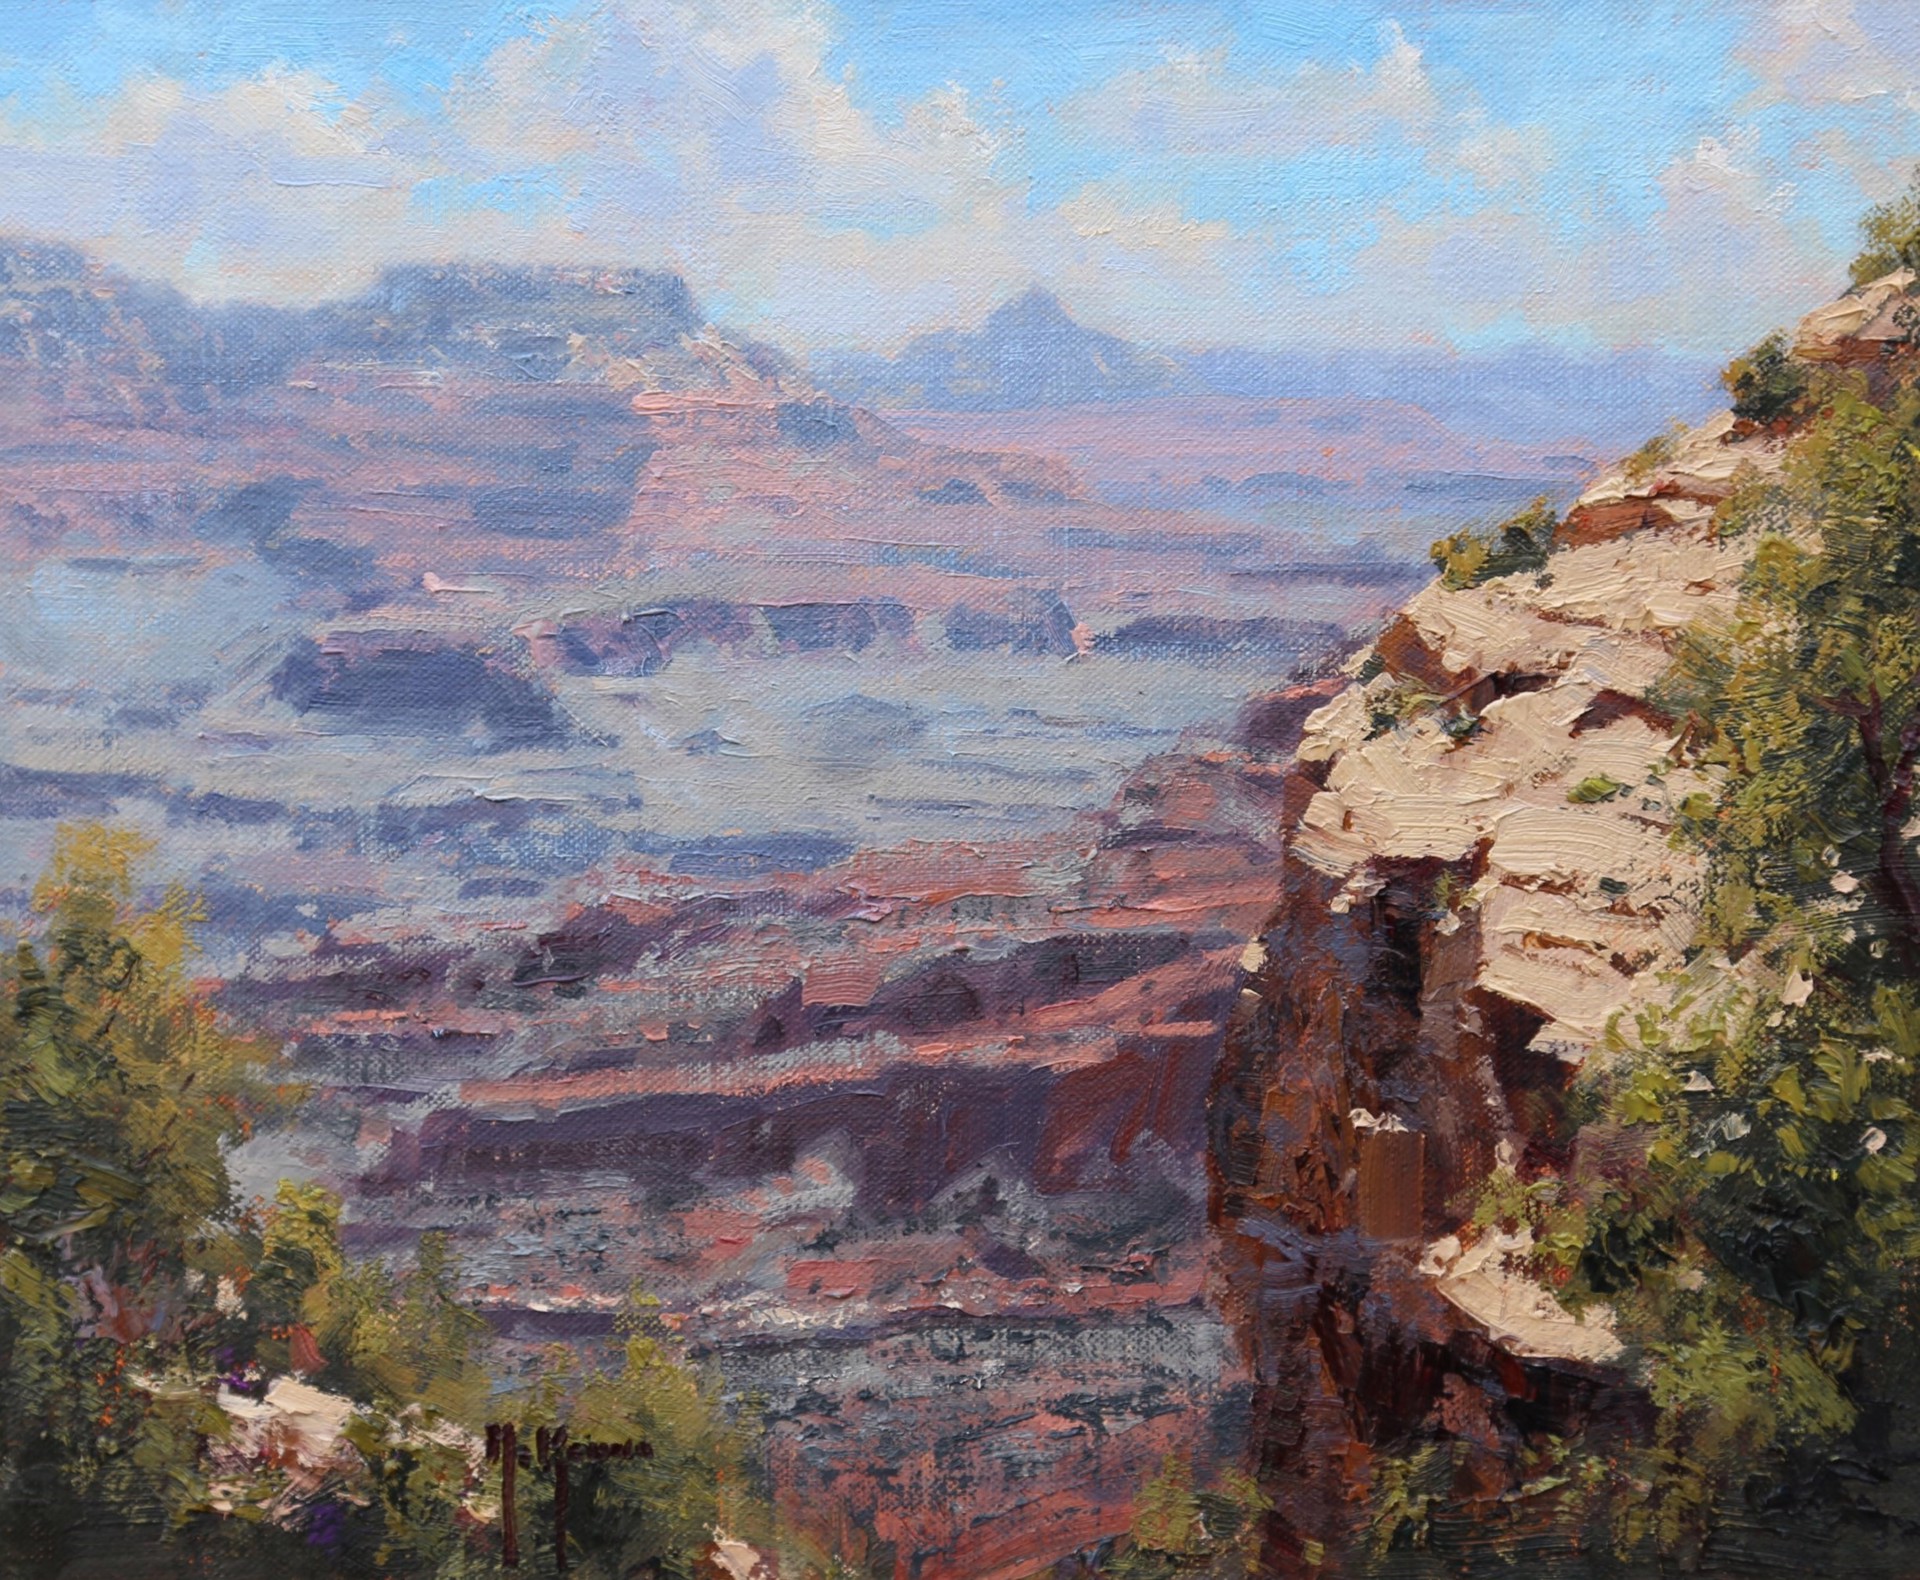 Morning Light (Mather Point) by Kenny McKenna